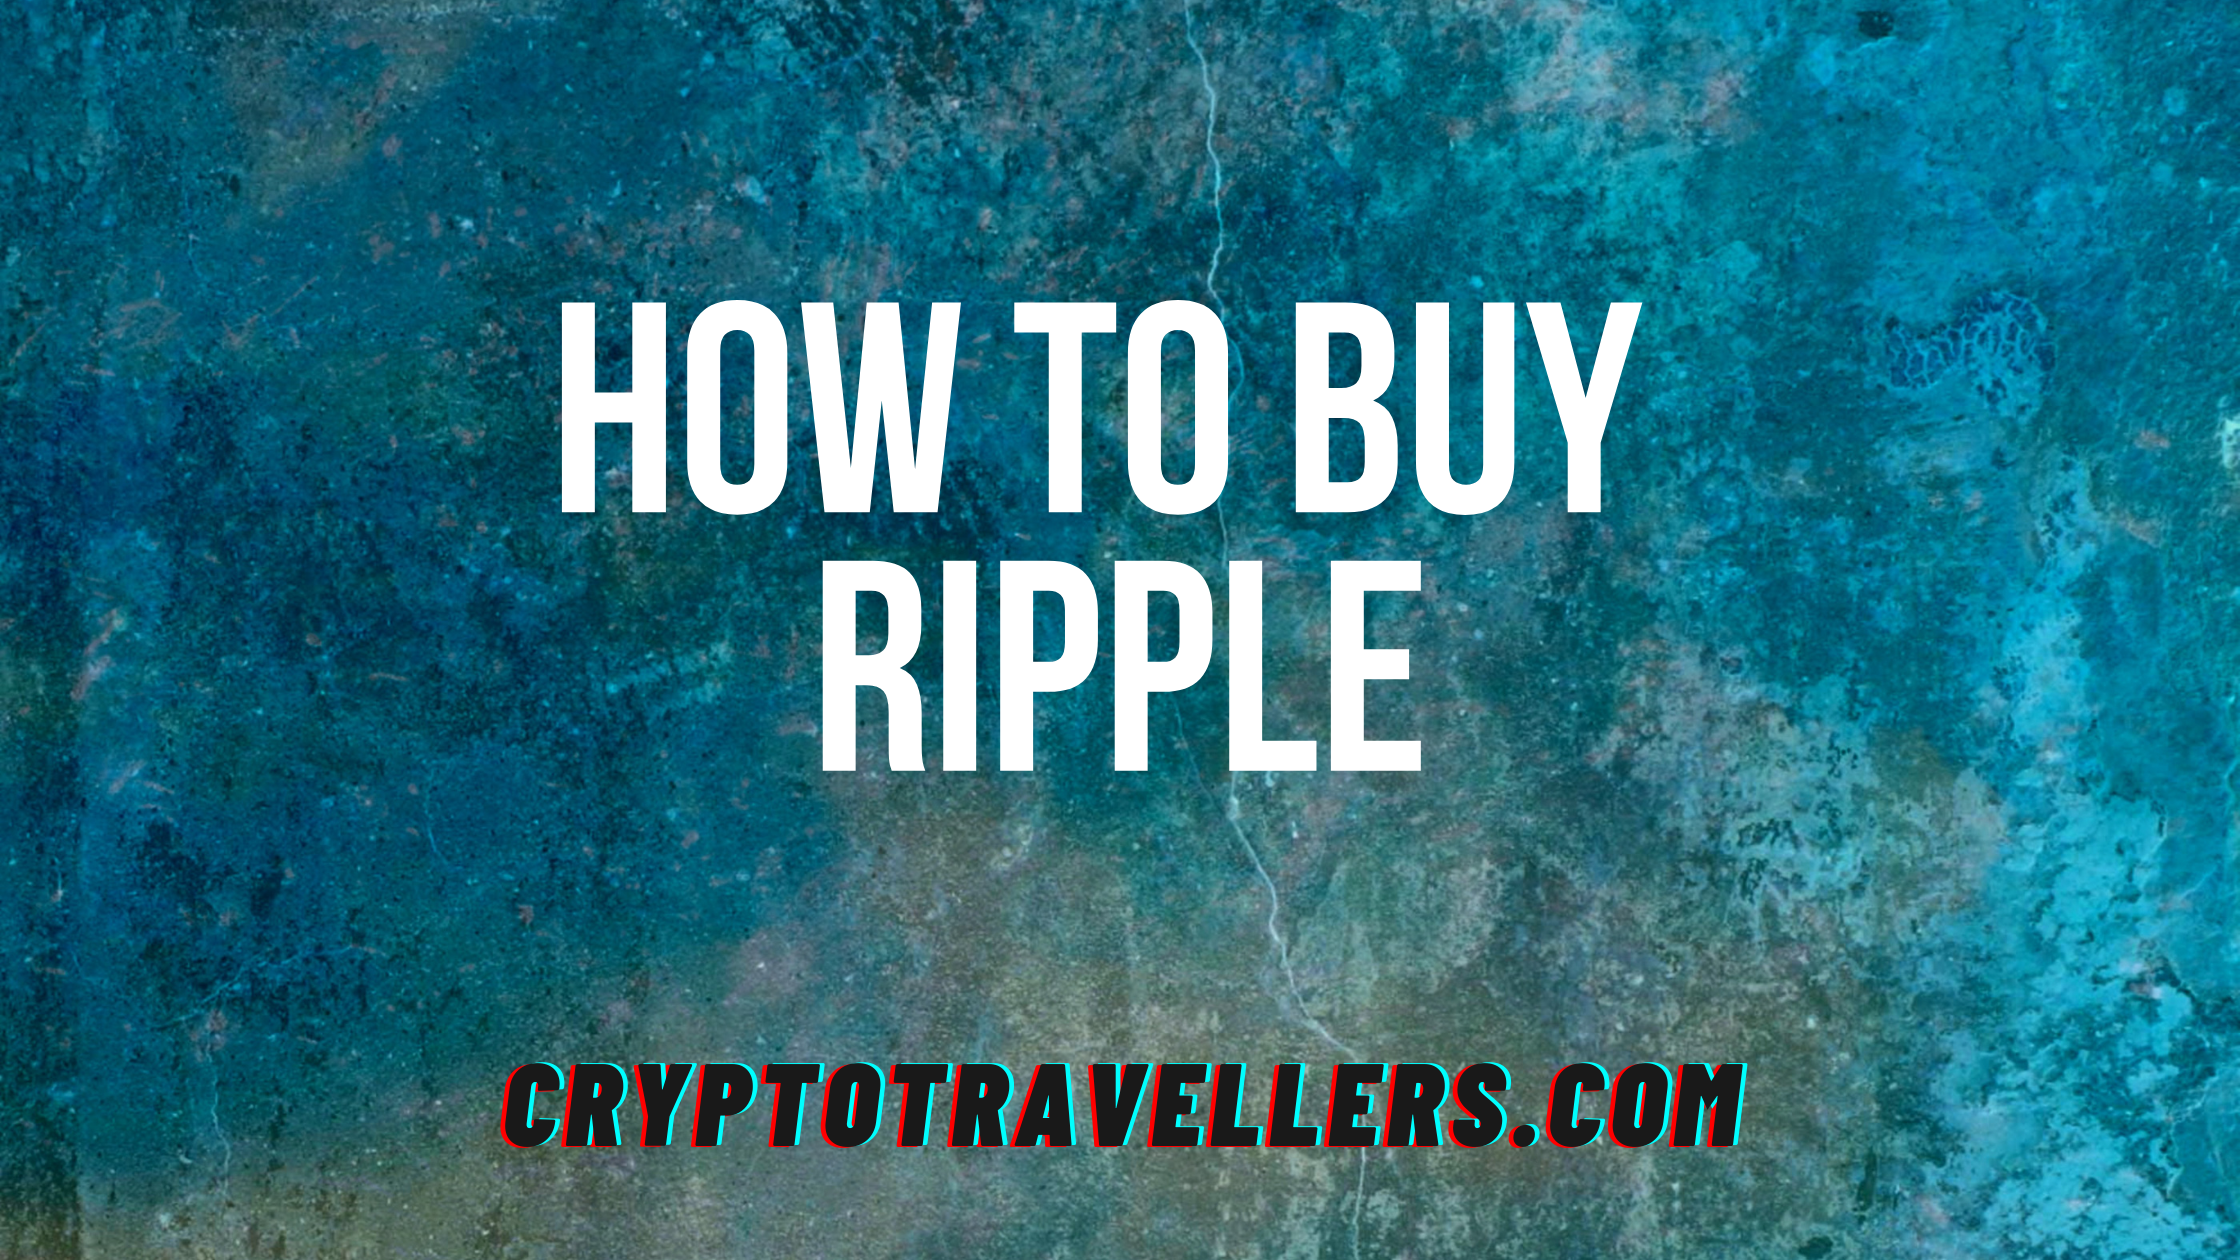 How to Buy XRP, Cryptocurrency or Ripple: Step-by-step Guide